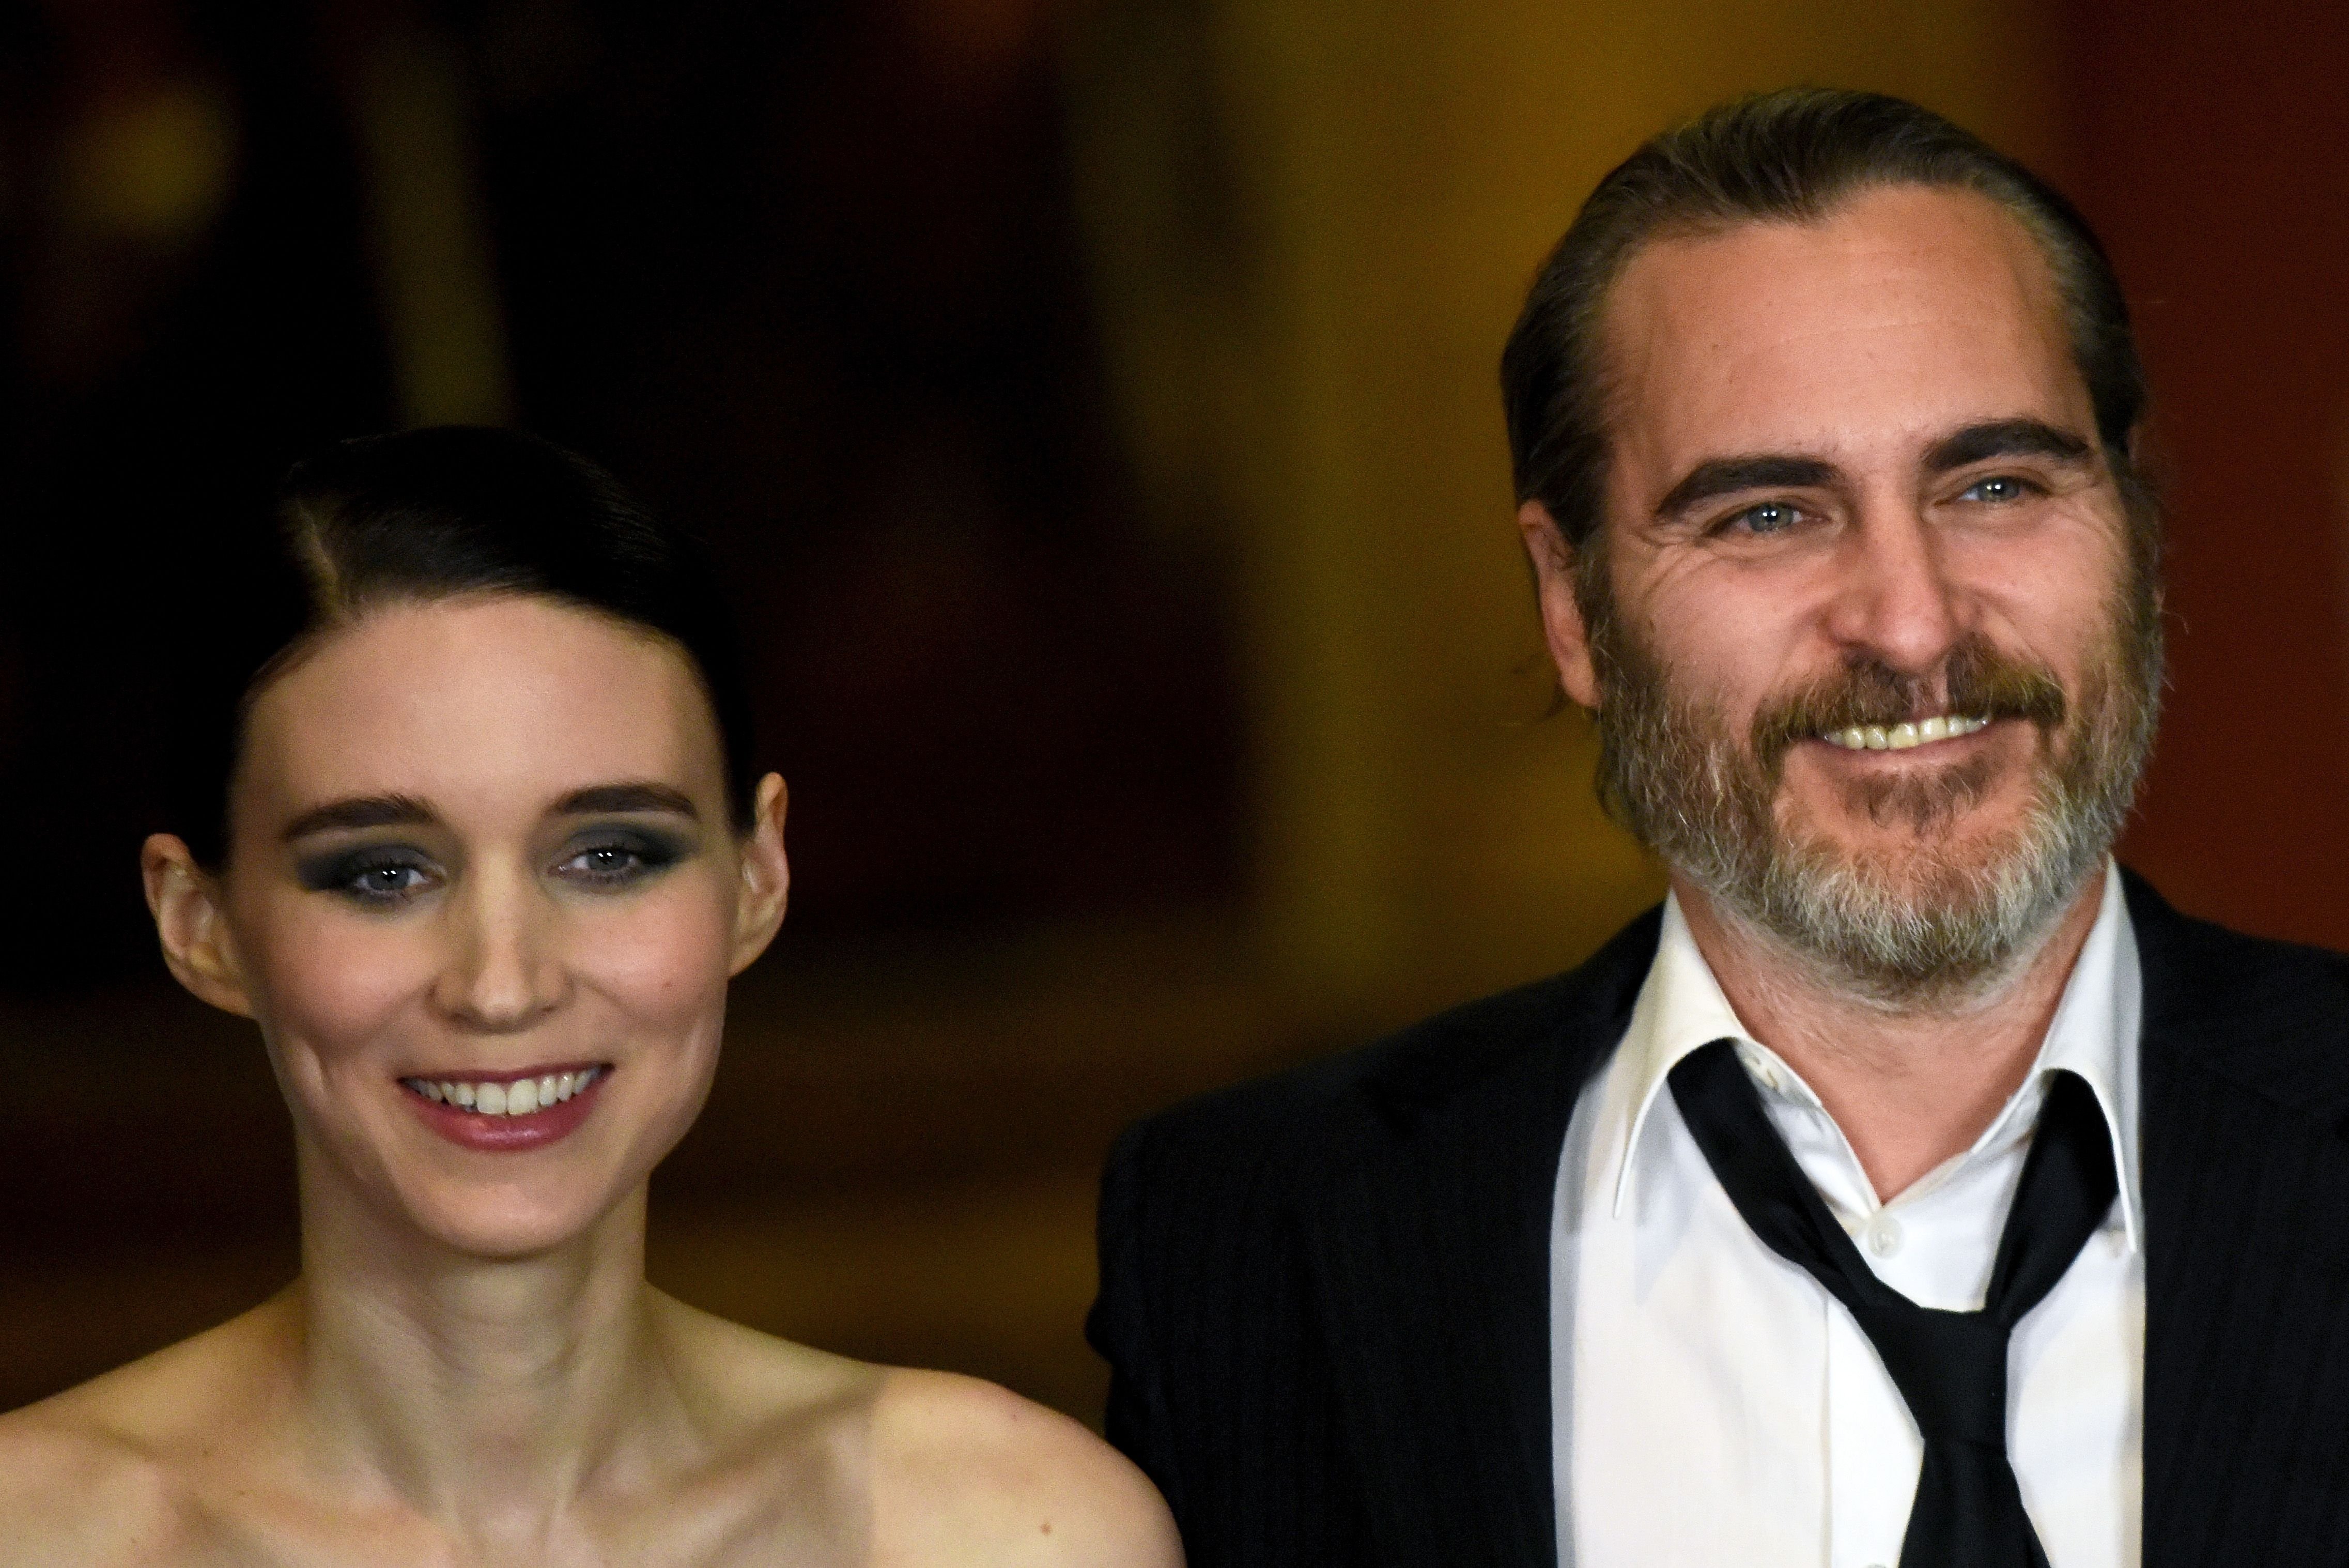 LONDON, ENGLAND - FEBRUARY 26: Joaquin Phoenix (L) and Rooney Mara attend the 'Mary Magdalene' special screening held at The National Gallery on February 26, 2018 in London, England. | Foto von: Dave J Hogan/Dave J Hogan/Getty Images